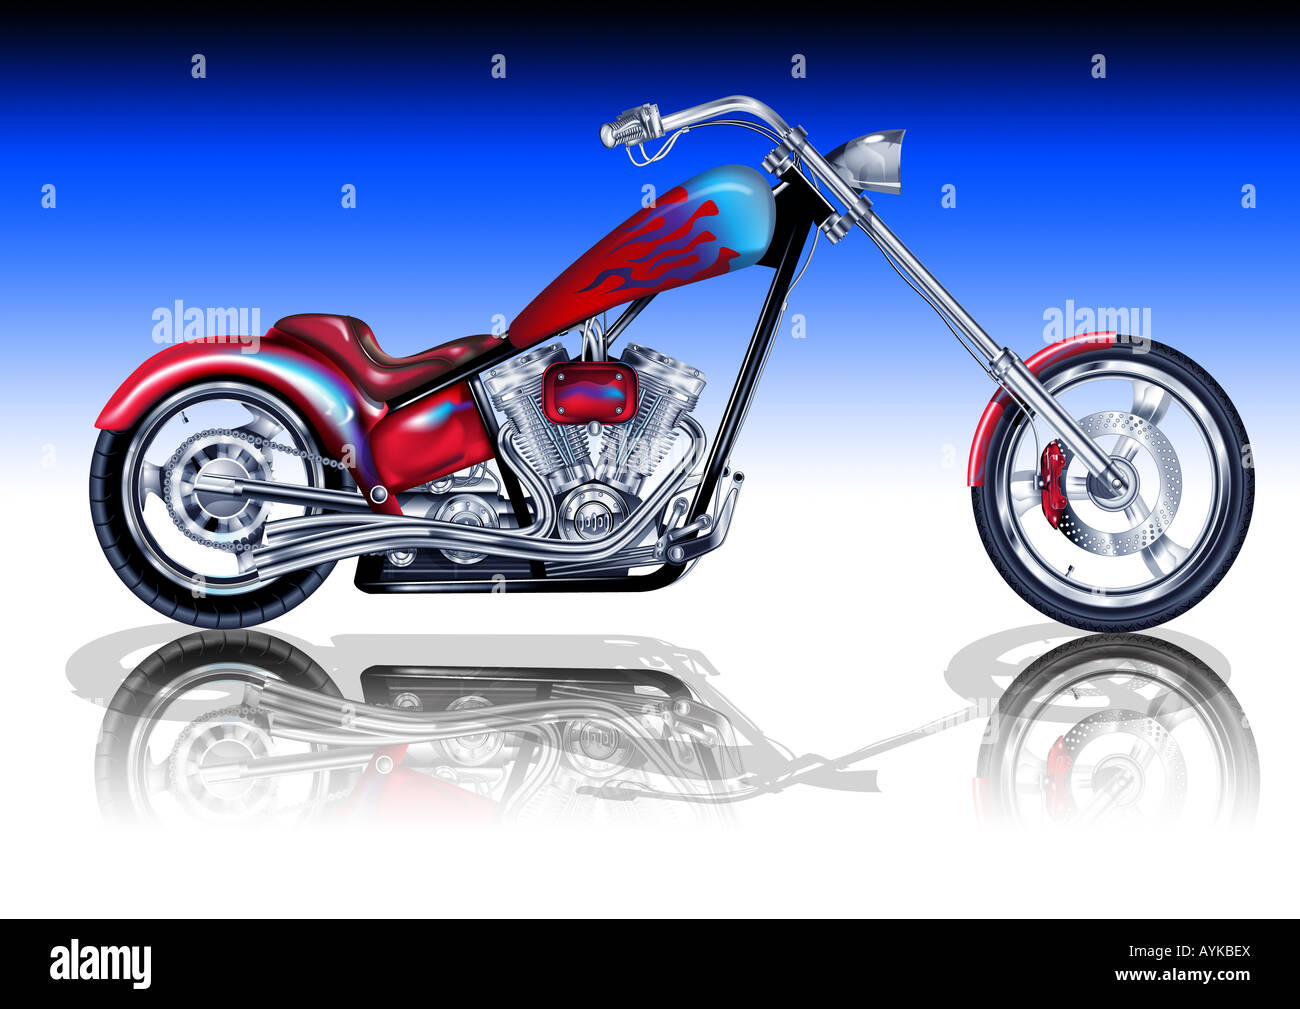 An illustration of a custom motorbike sitting on a reflective surface Stock Photo